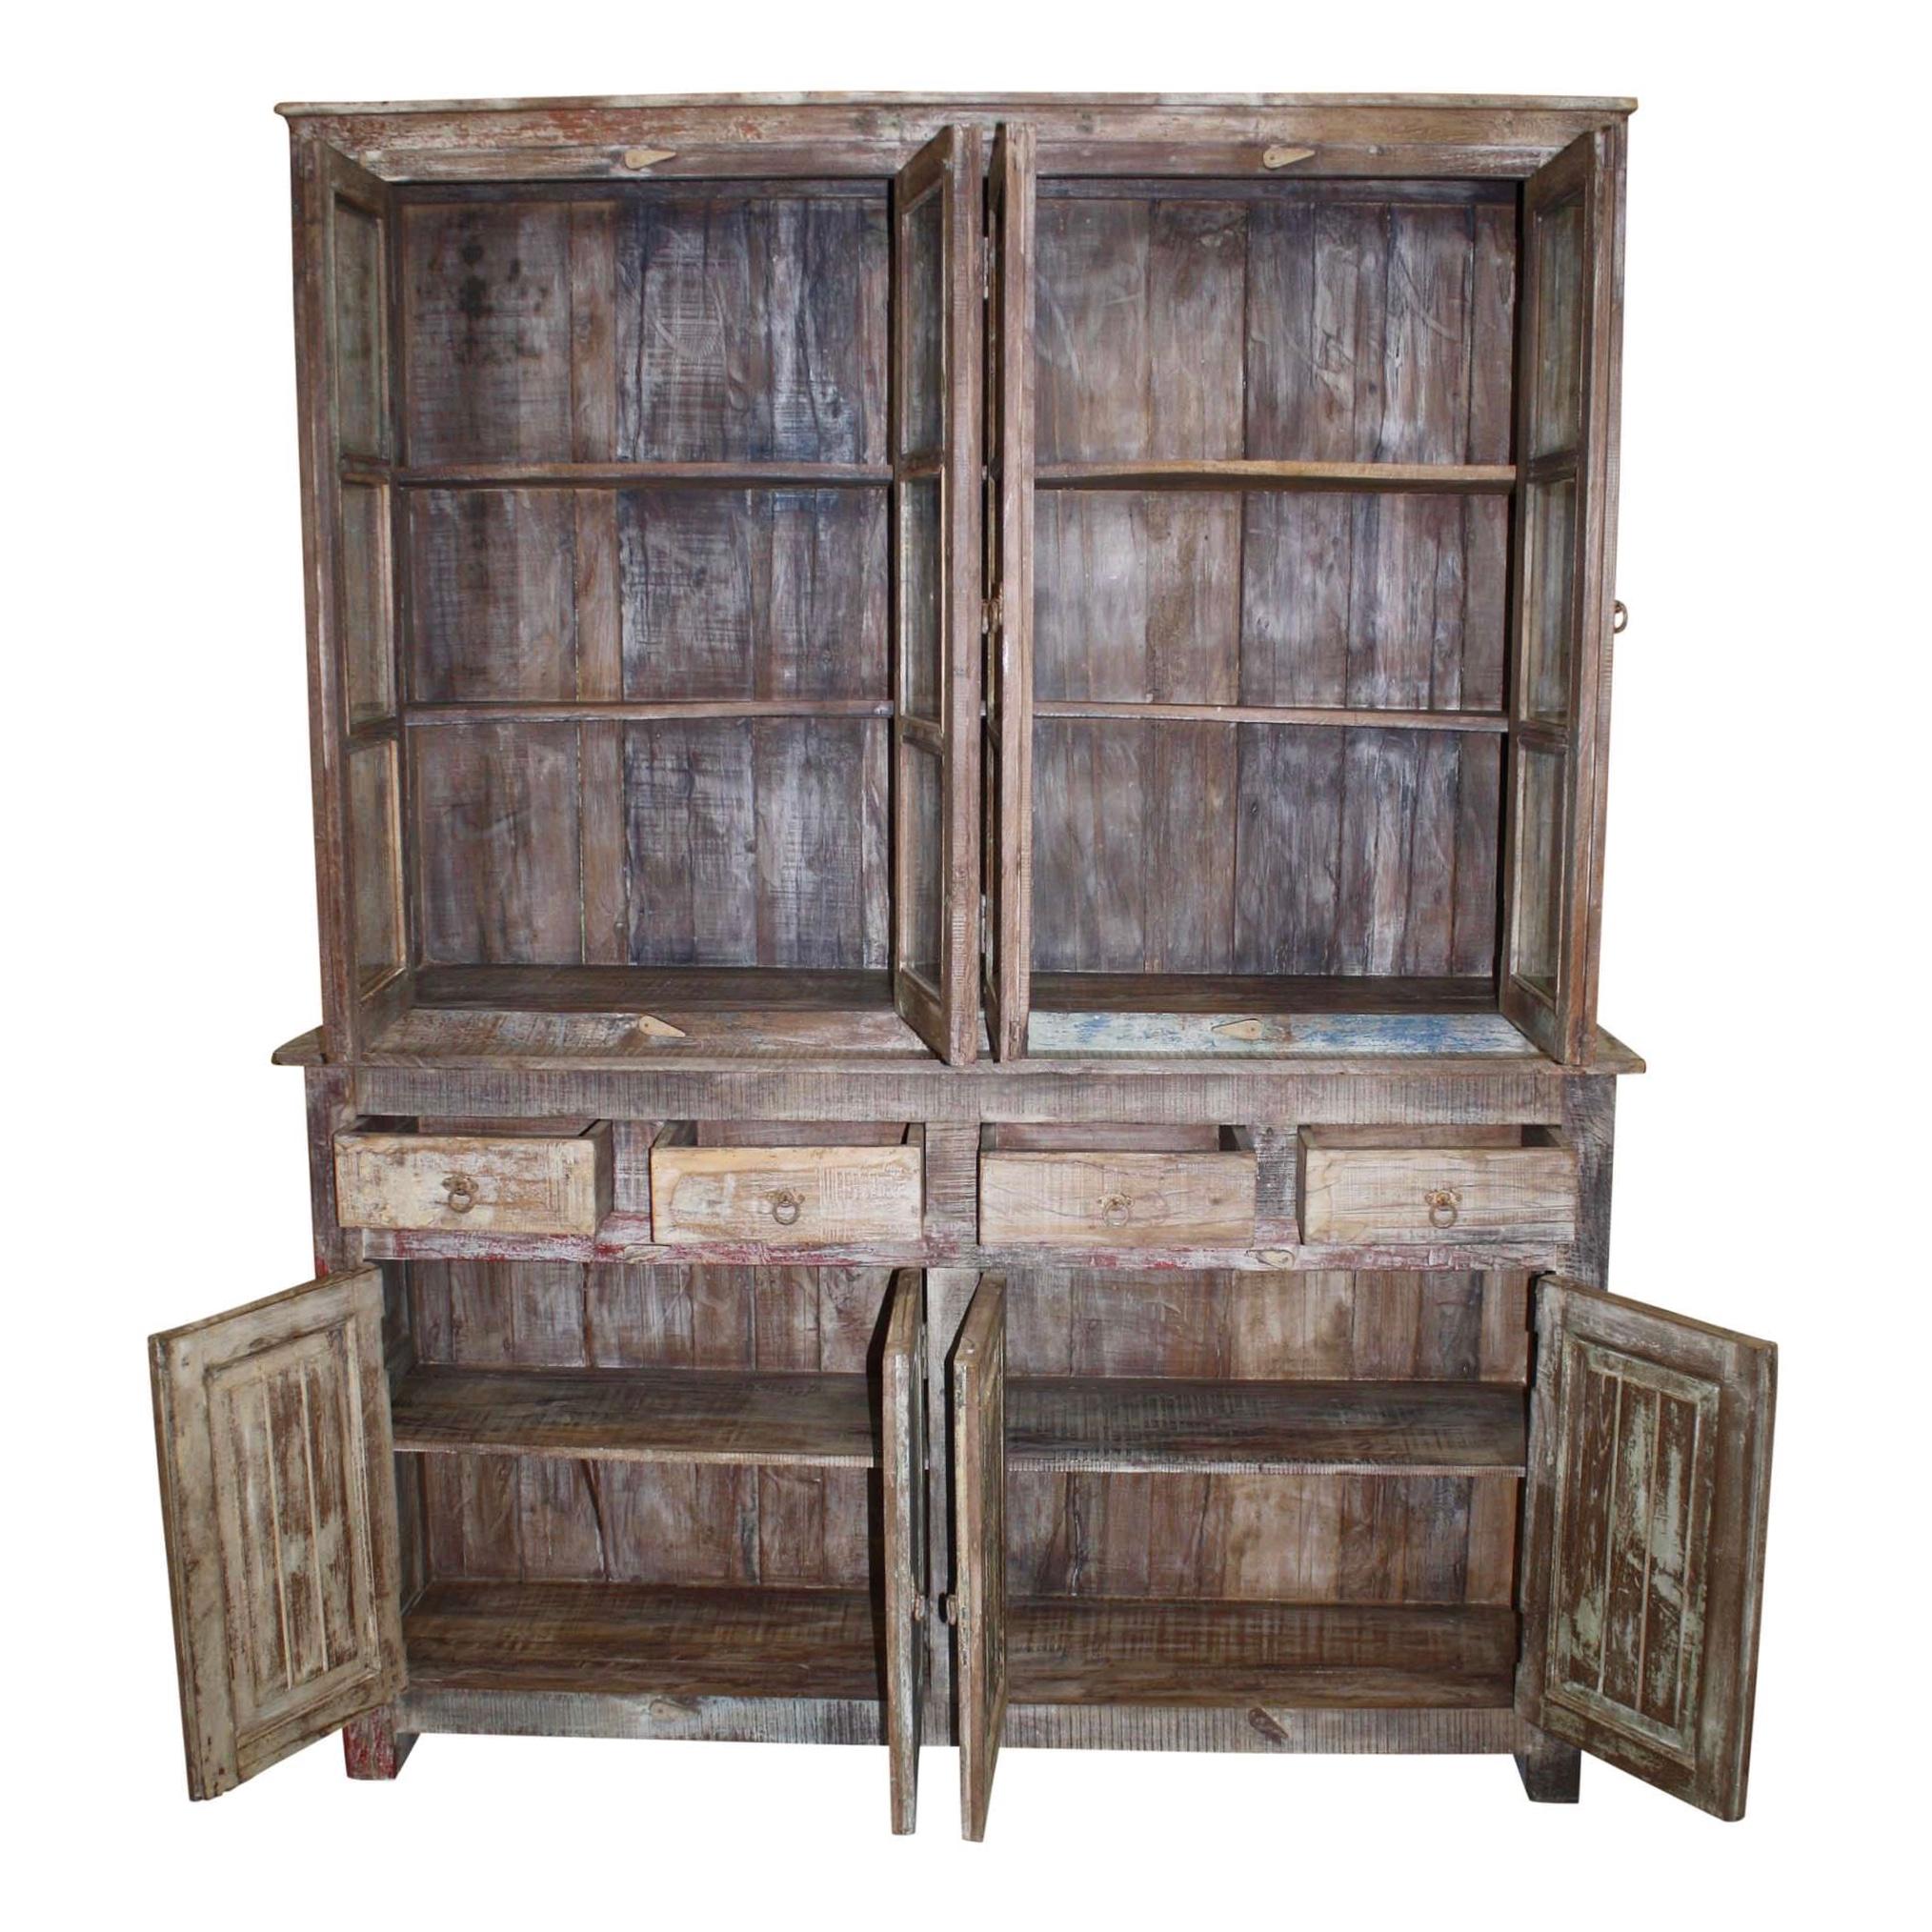 An exceptional, reproduction piece of solid wood construction and glass pane doors, this double-bodied, painted and distressed cabinet is suitable as a hutch, bookcase, or display cabinet. The upper portion has four doors with three glass panes in